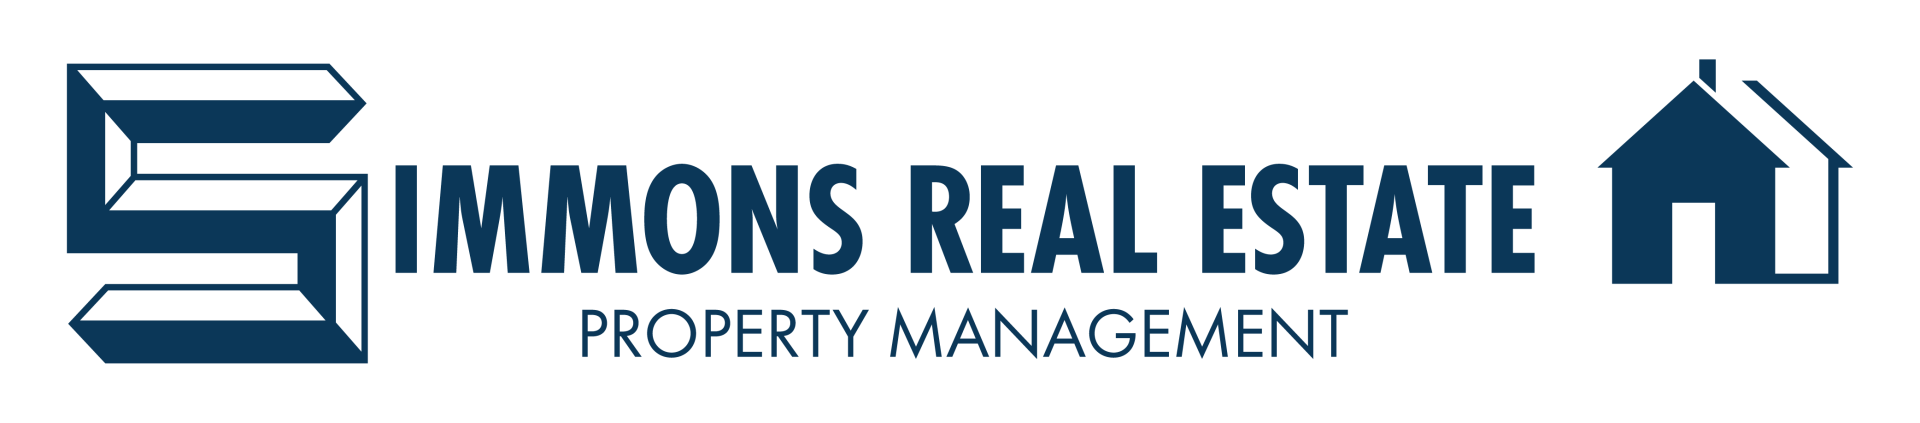 Simmons Real Estate Property Management Logo